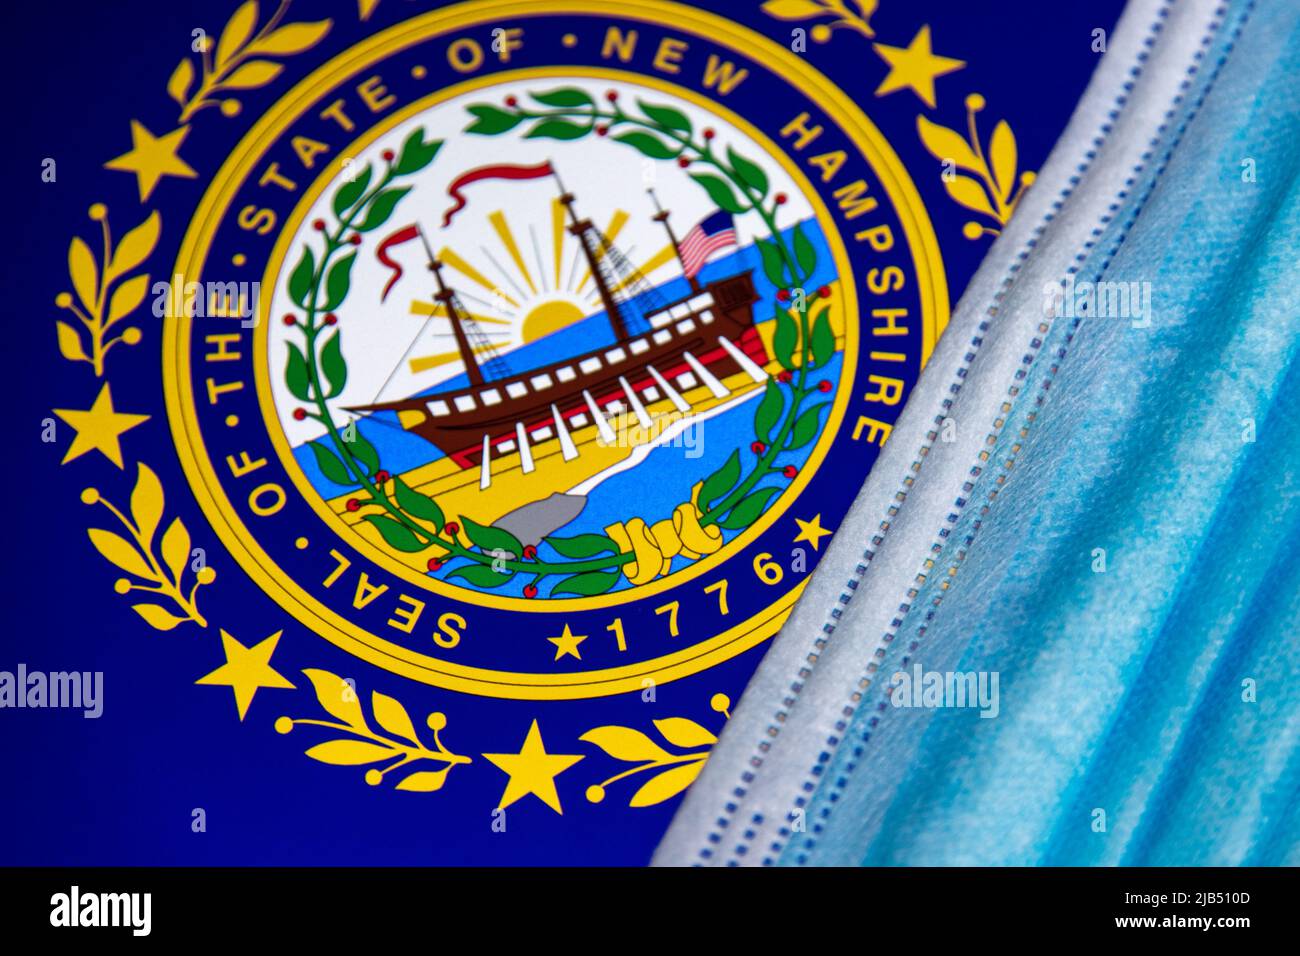 Facial Mask on Flag and seal of New Hampshire. Several communities in NH require that face coverings be worn in public, effective November 20 in 2020. Stock Photo